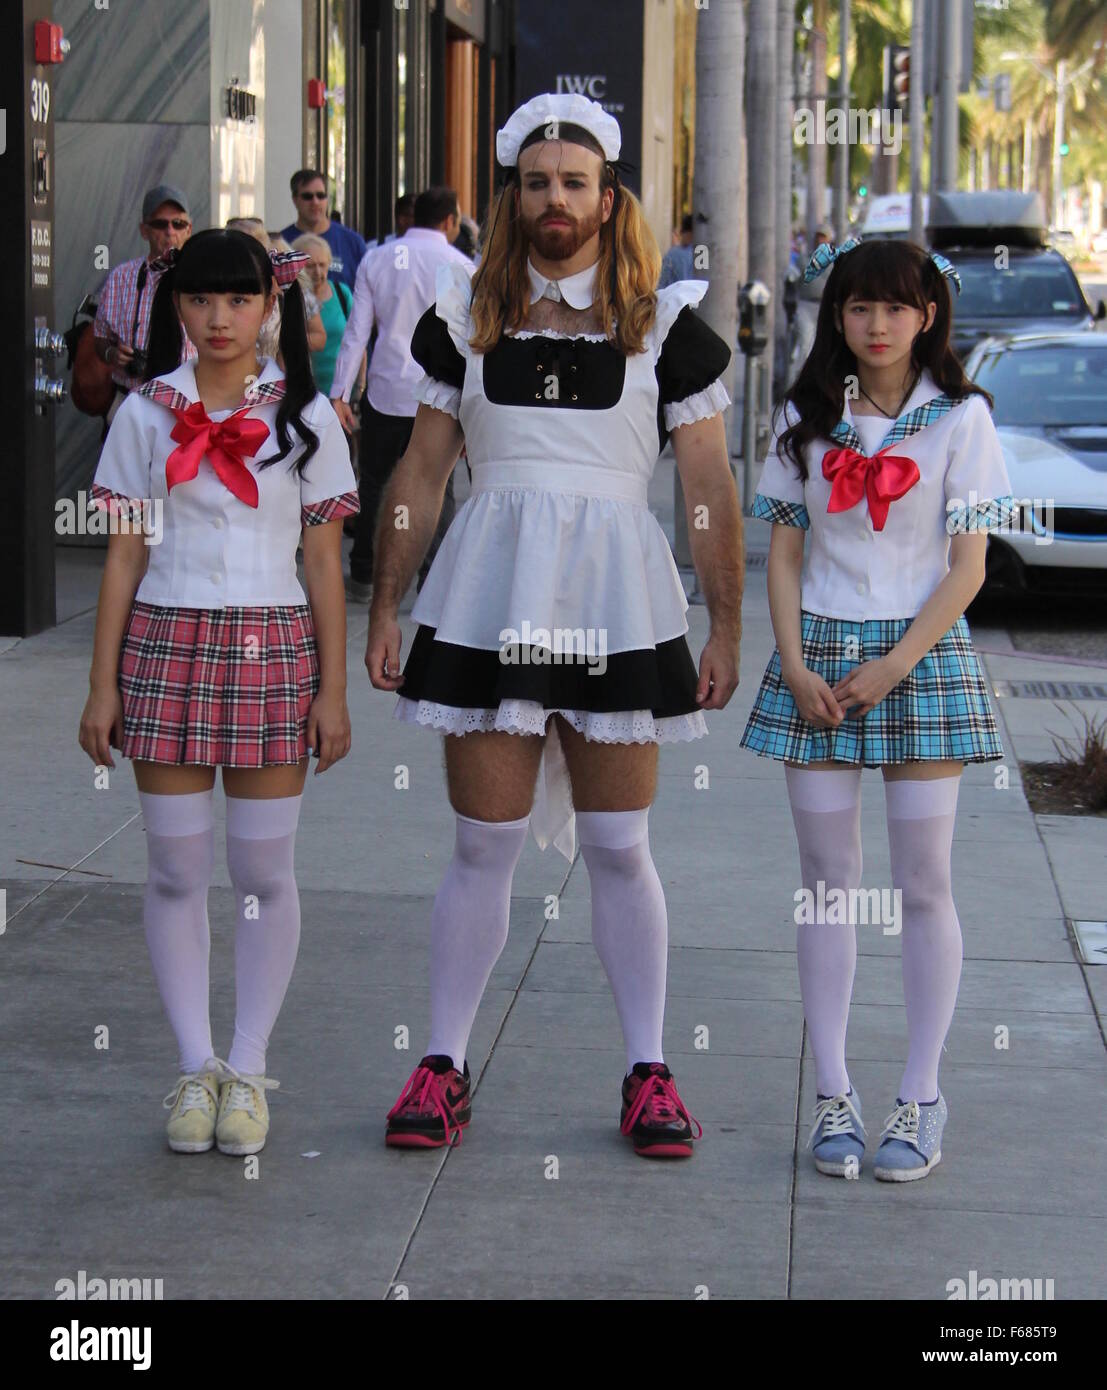 Japanese pop metal band Ladybaby featuring Ladybeard out and about in Beverly Hills Featuring: Ladybaby, Ladybeard Where: Los Angeles, California, United States When: Oct 2015 Stock Photo - Alamy